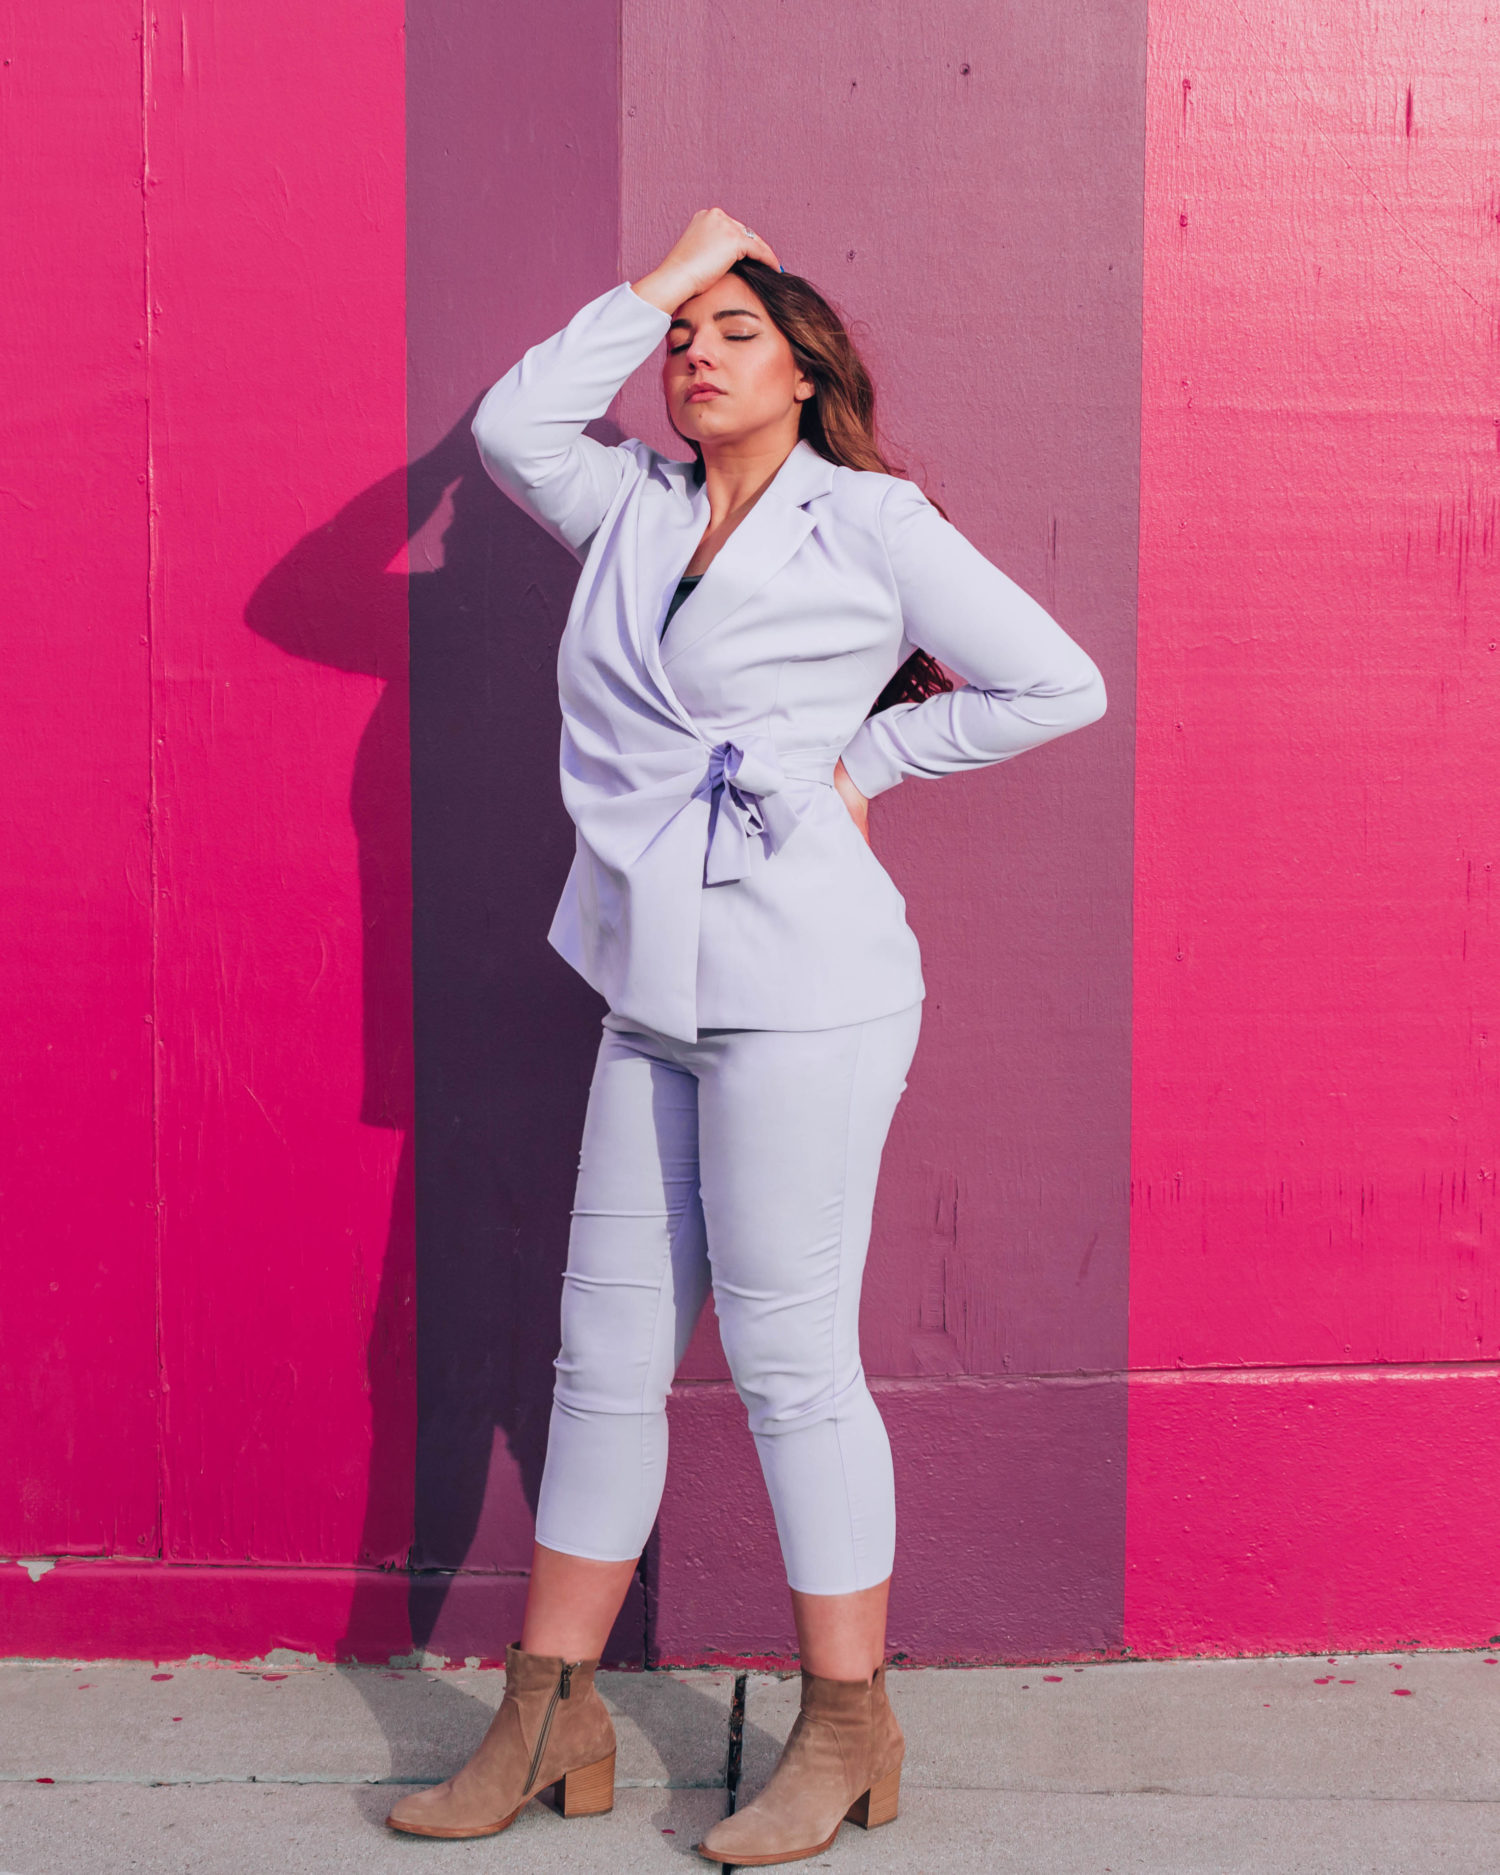 Woman in monochromatic purple pant suit posing dramatically in front of a pink and purple striped wall.